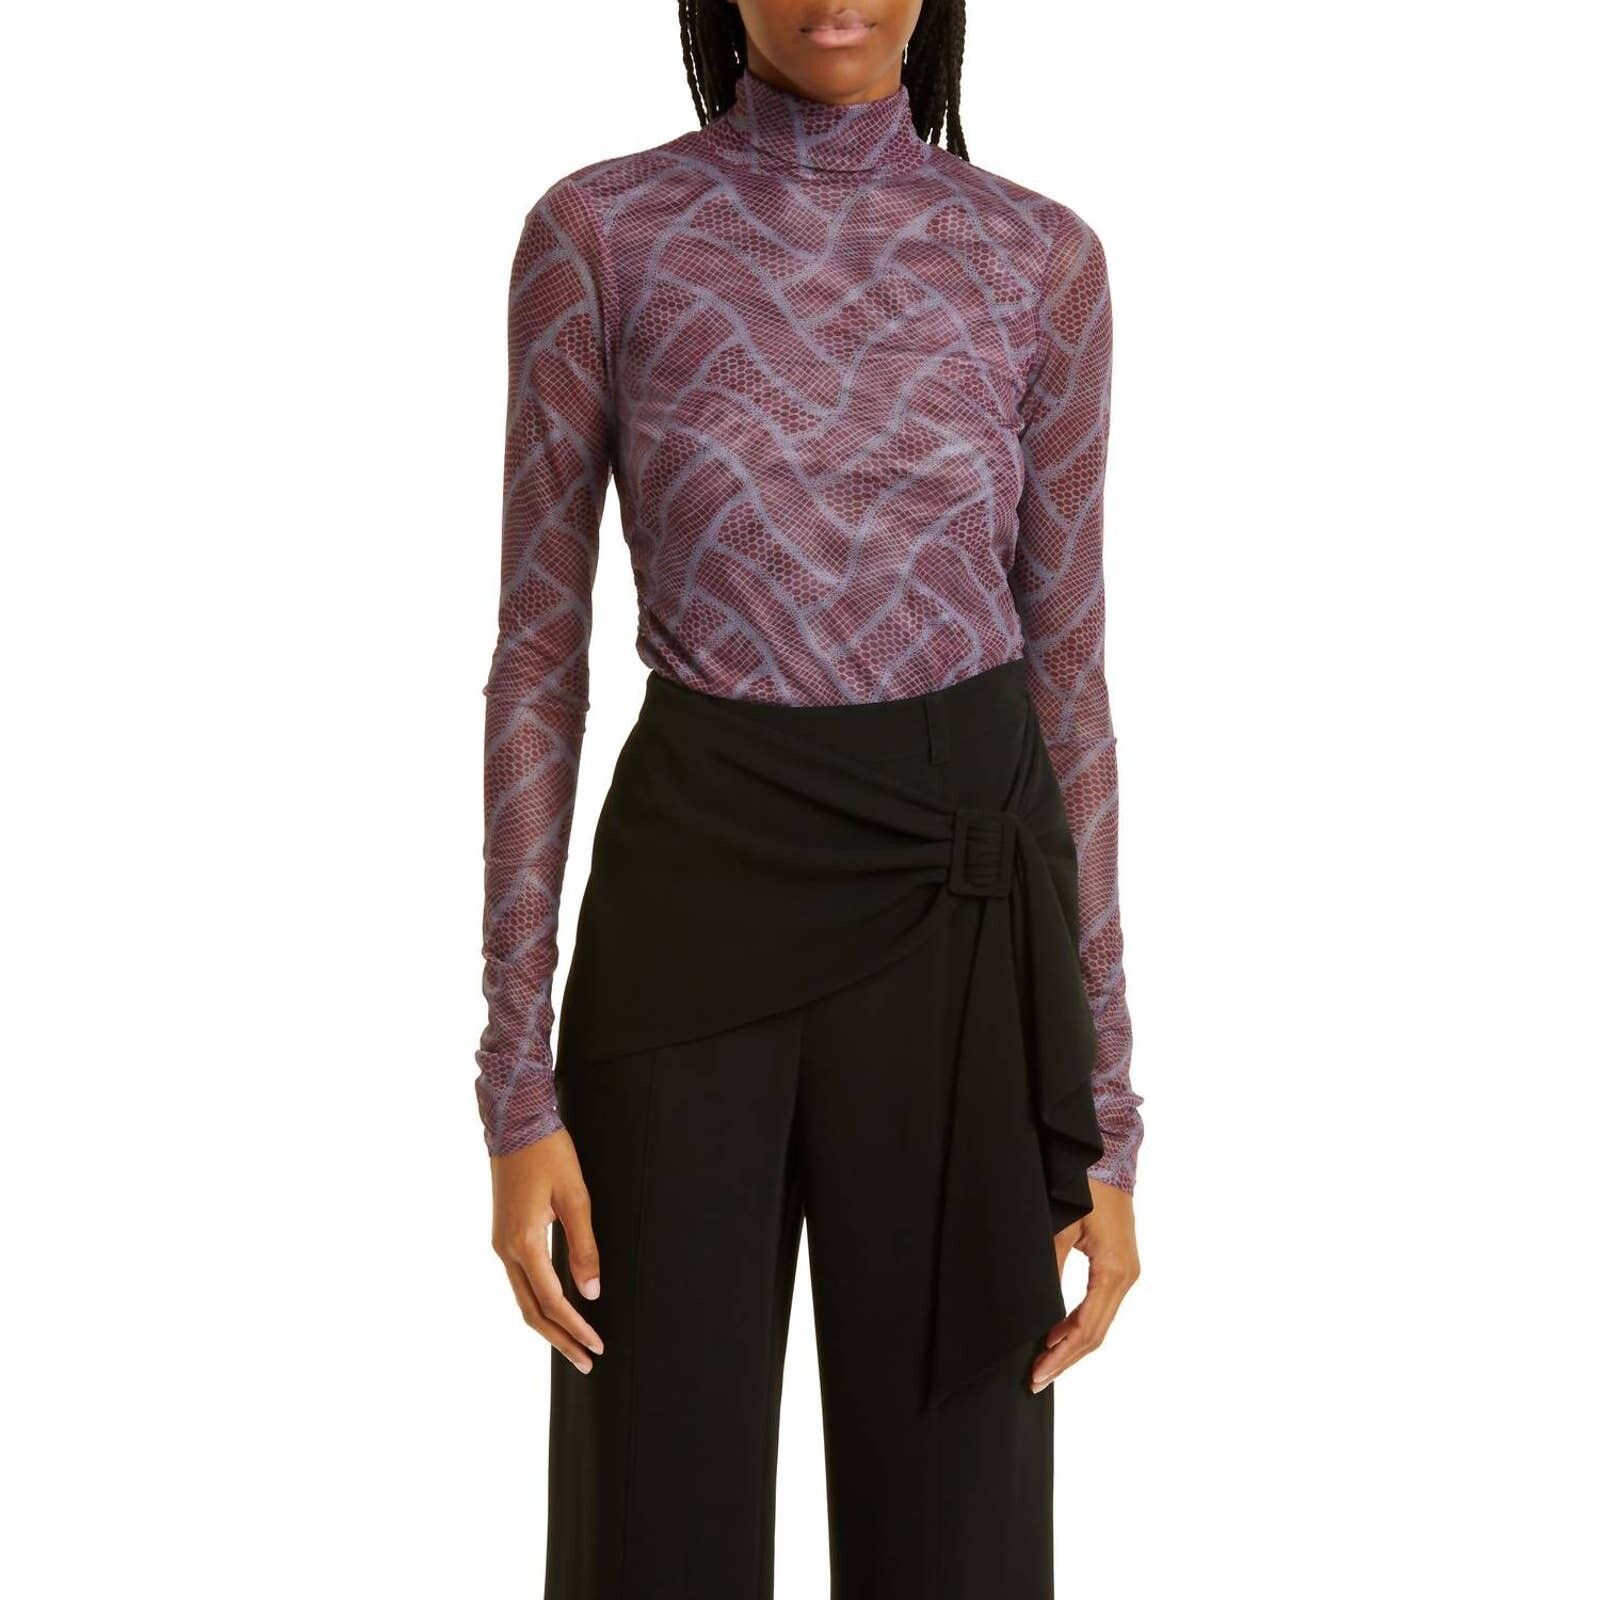 Cinq a sept Fishnet Turtleneck Top In Calla Lily/lilac | Grailed